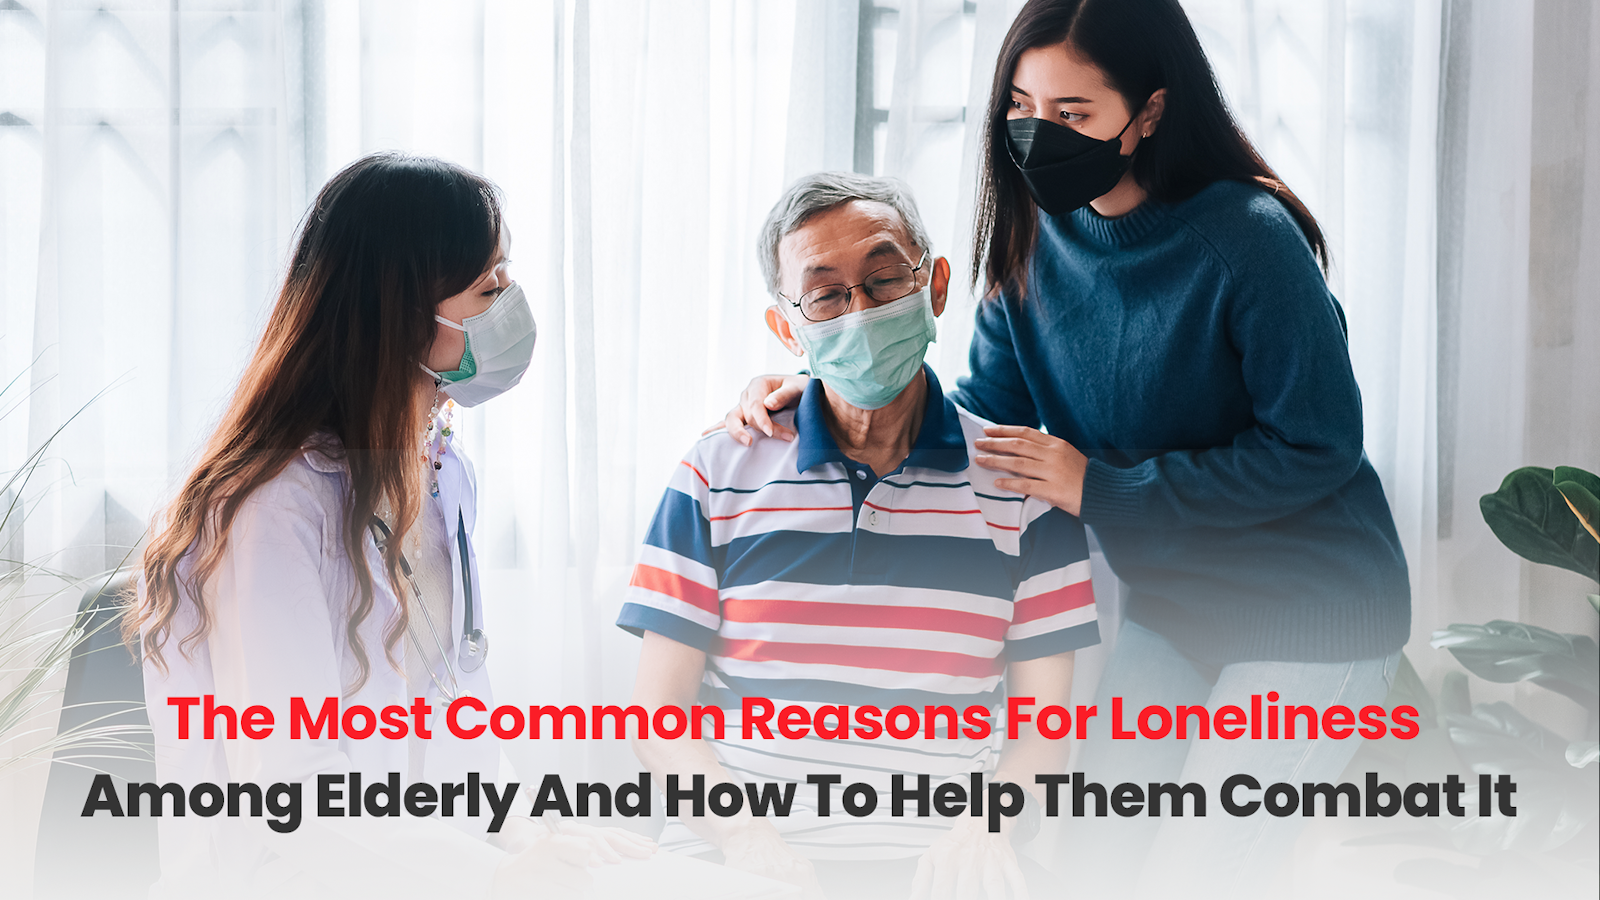 The Most Common Reasons For Loneliness Among Elderly And How To Help Them Combat It